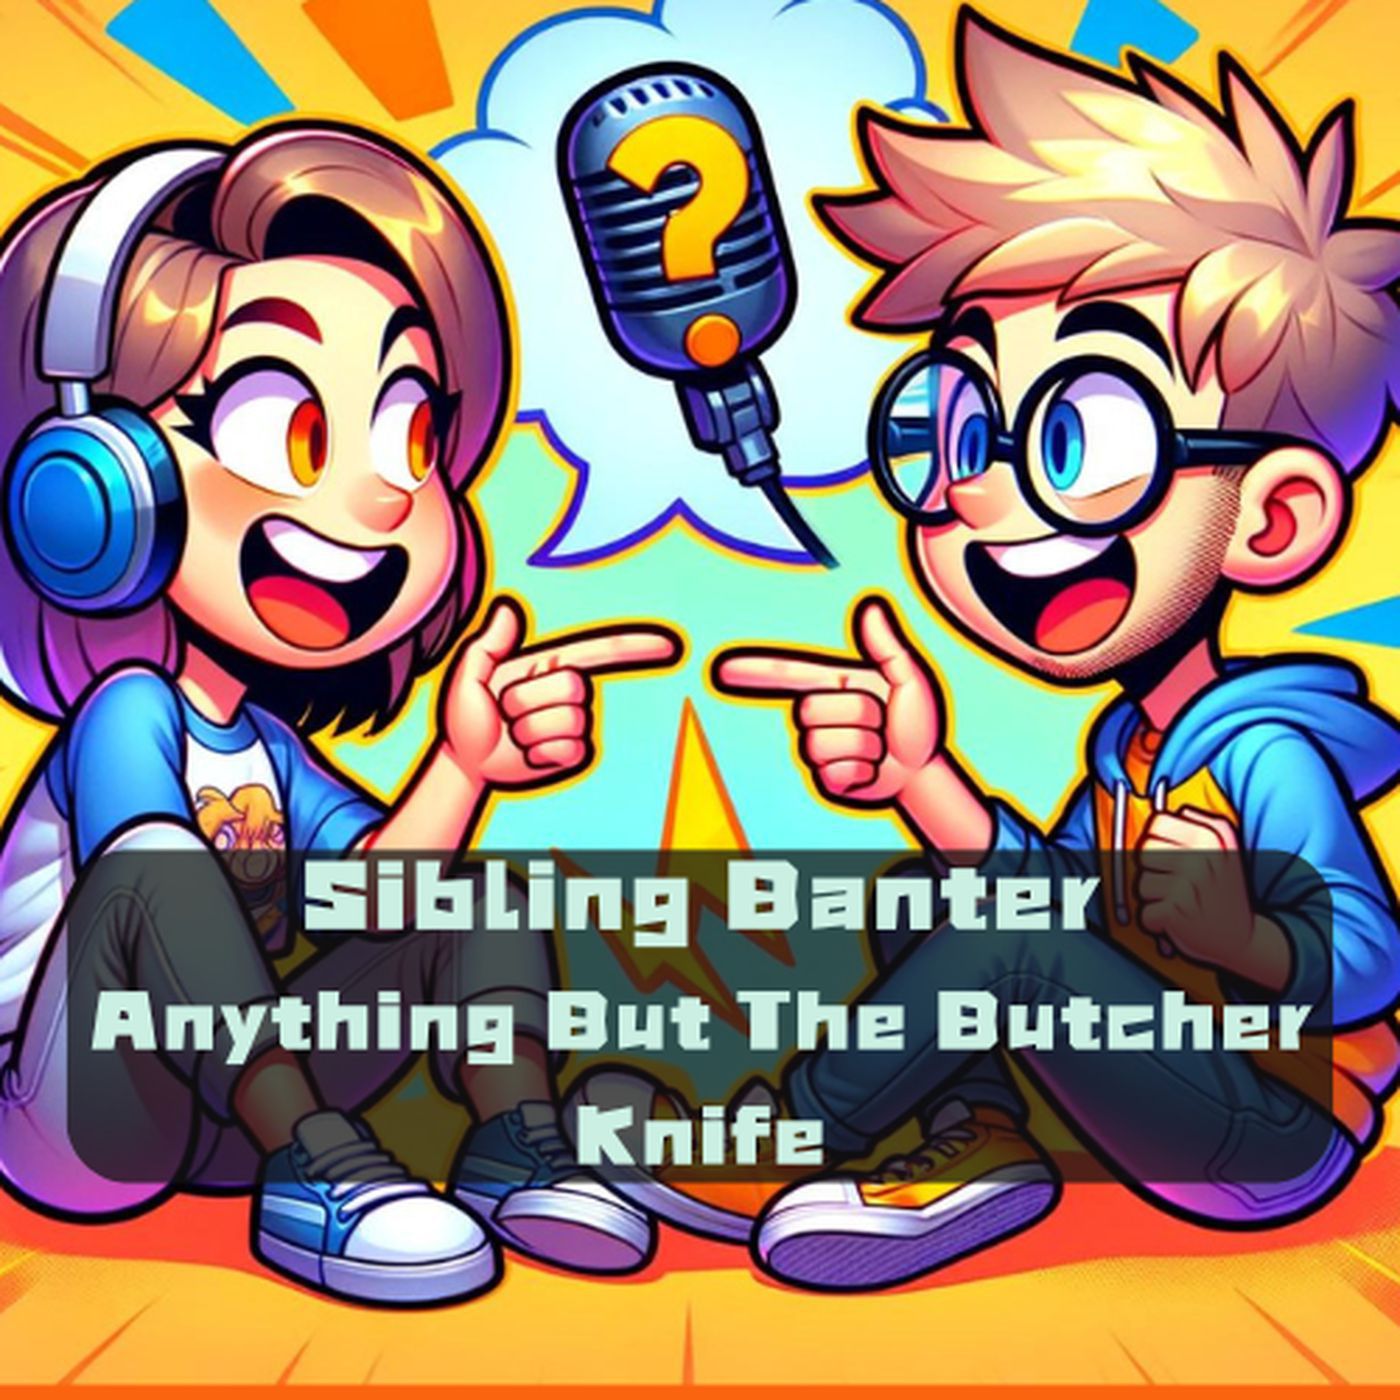 Sibling Banter: Anything But The Butcher Knife